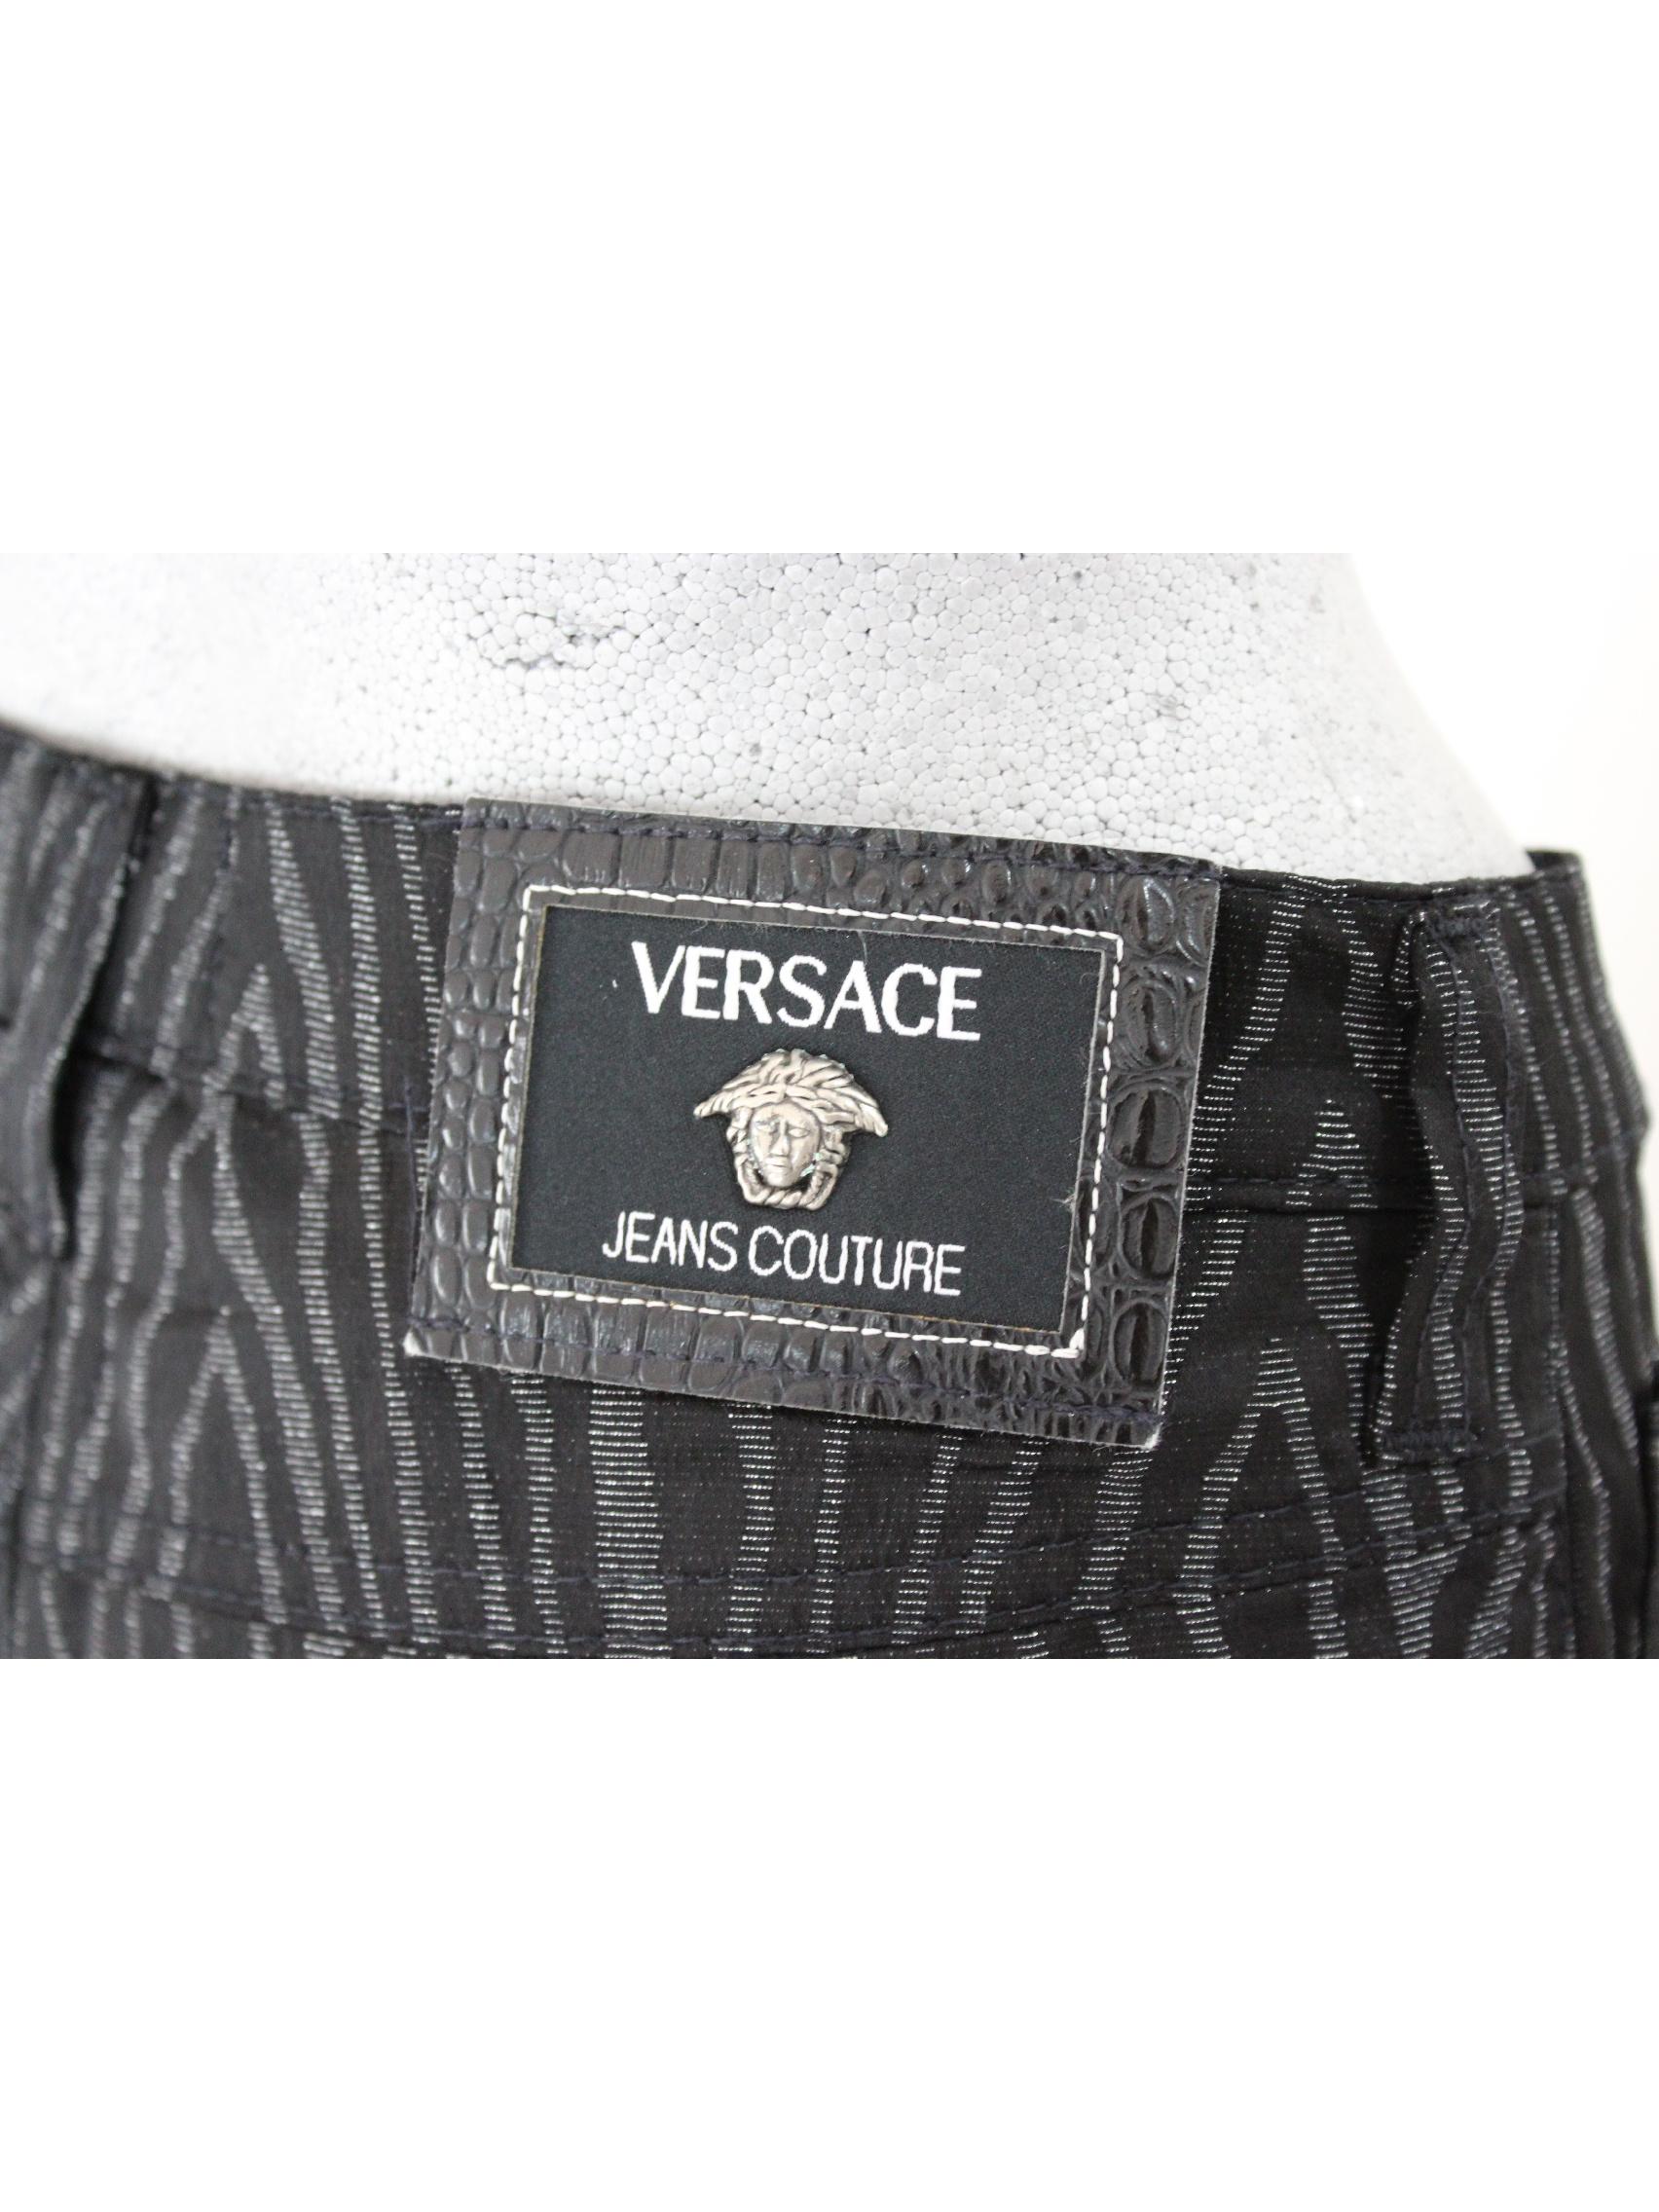 Gianni Versace Jeans Couture Pants Spotted Lurex Vintage Black Gray, 1990s 2